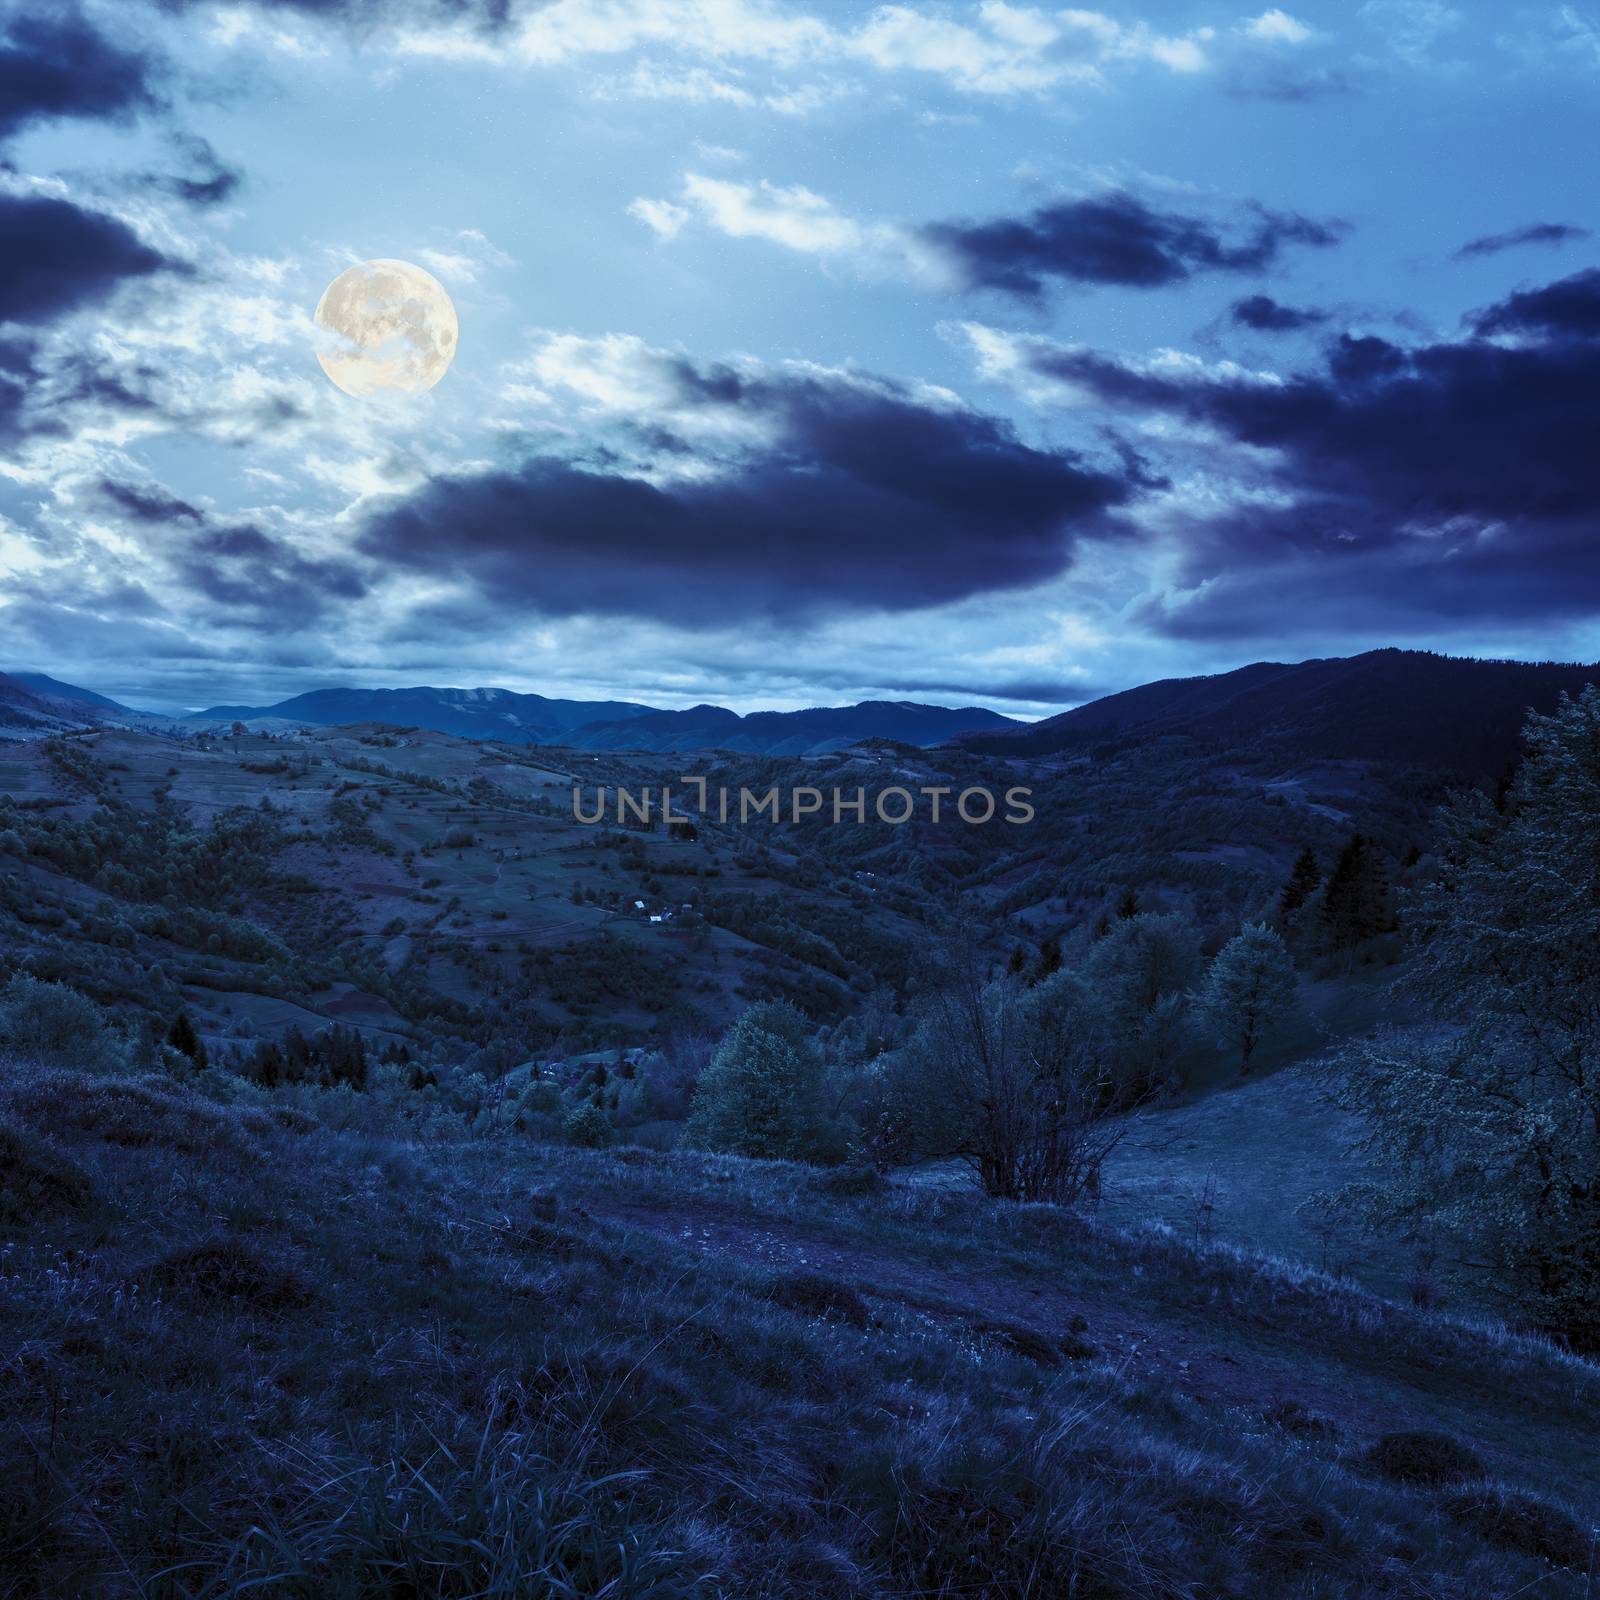 green fields in the mountains near native village under a blue summer sky at night in full moon light